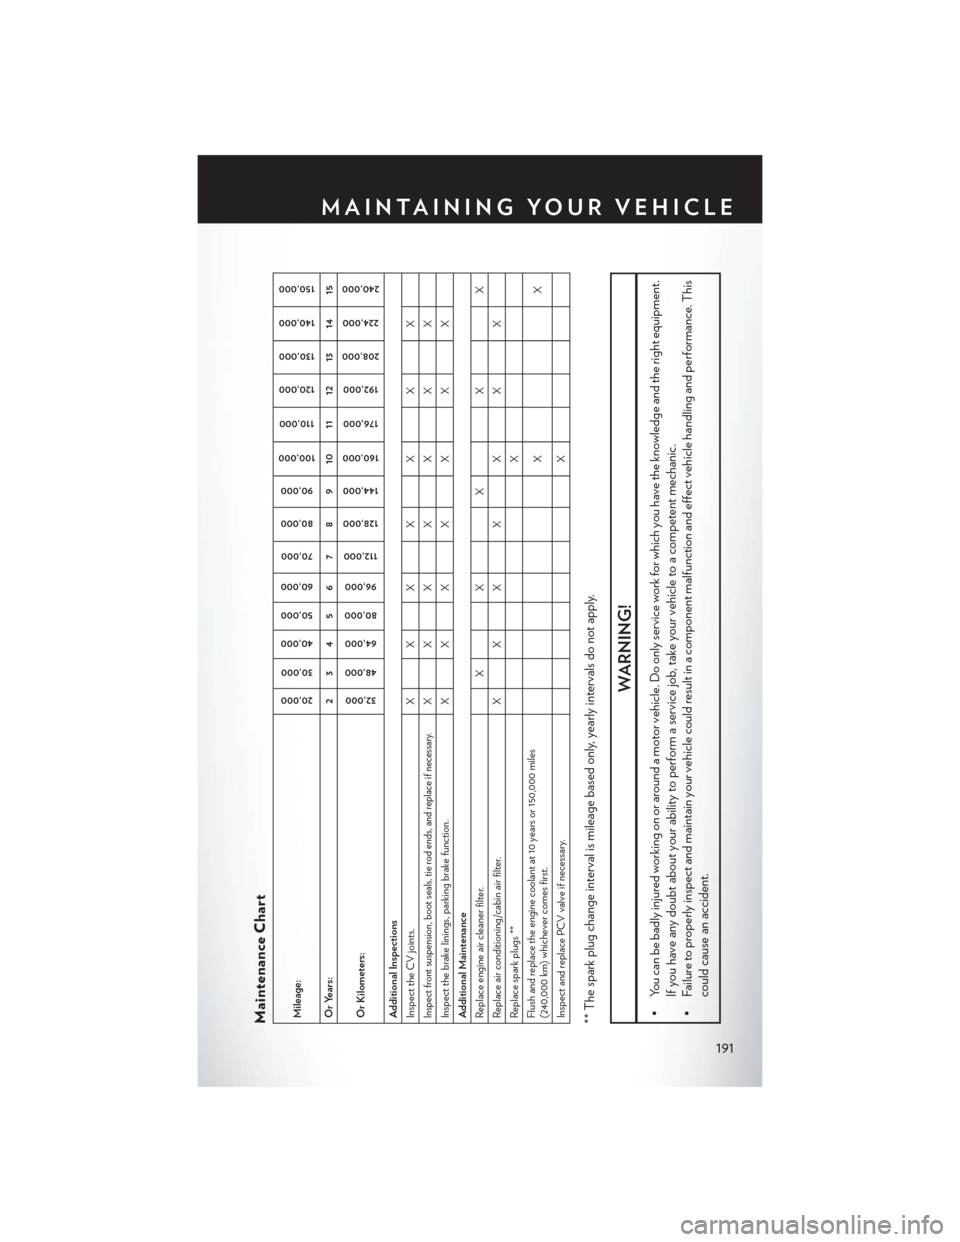 CHRYSLER 200 2015 2.G User Guide Maintenance ChartMileage:
20,00030,000
40,000 50,000
60,000
70,000
80,000 90,000
100,000
110,000
120,000 130,000
140,000 150,000
Or Years: 2 3 4 5 6 7 8 9 10 11 12 13 14 15
Or Kilometers:
32,000
48,00